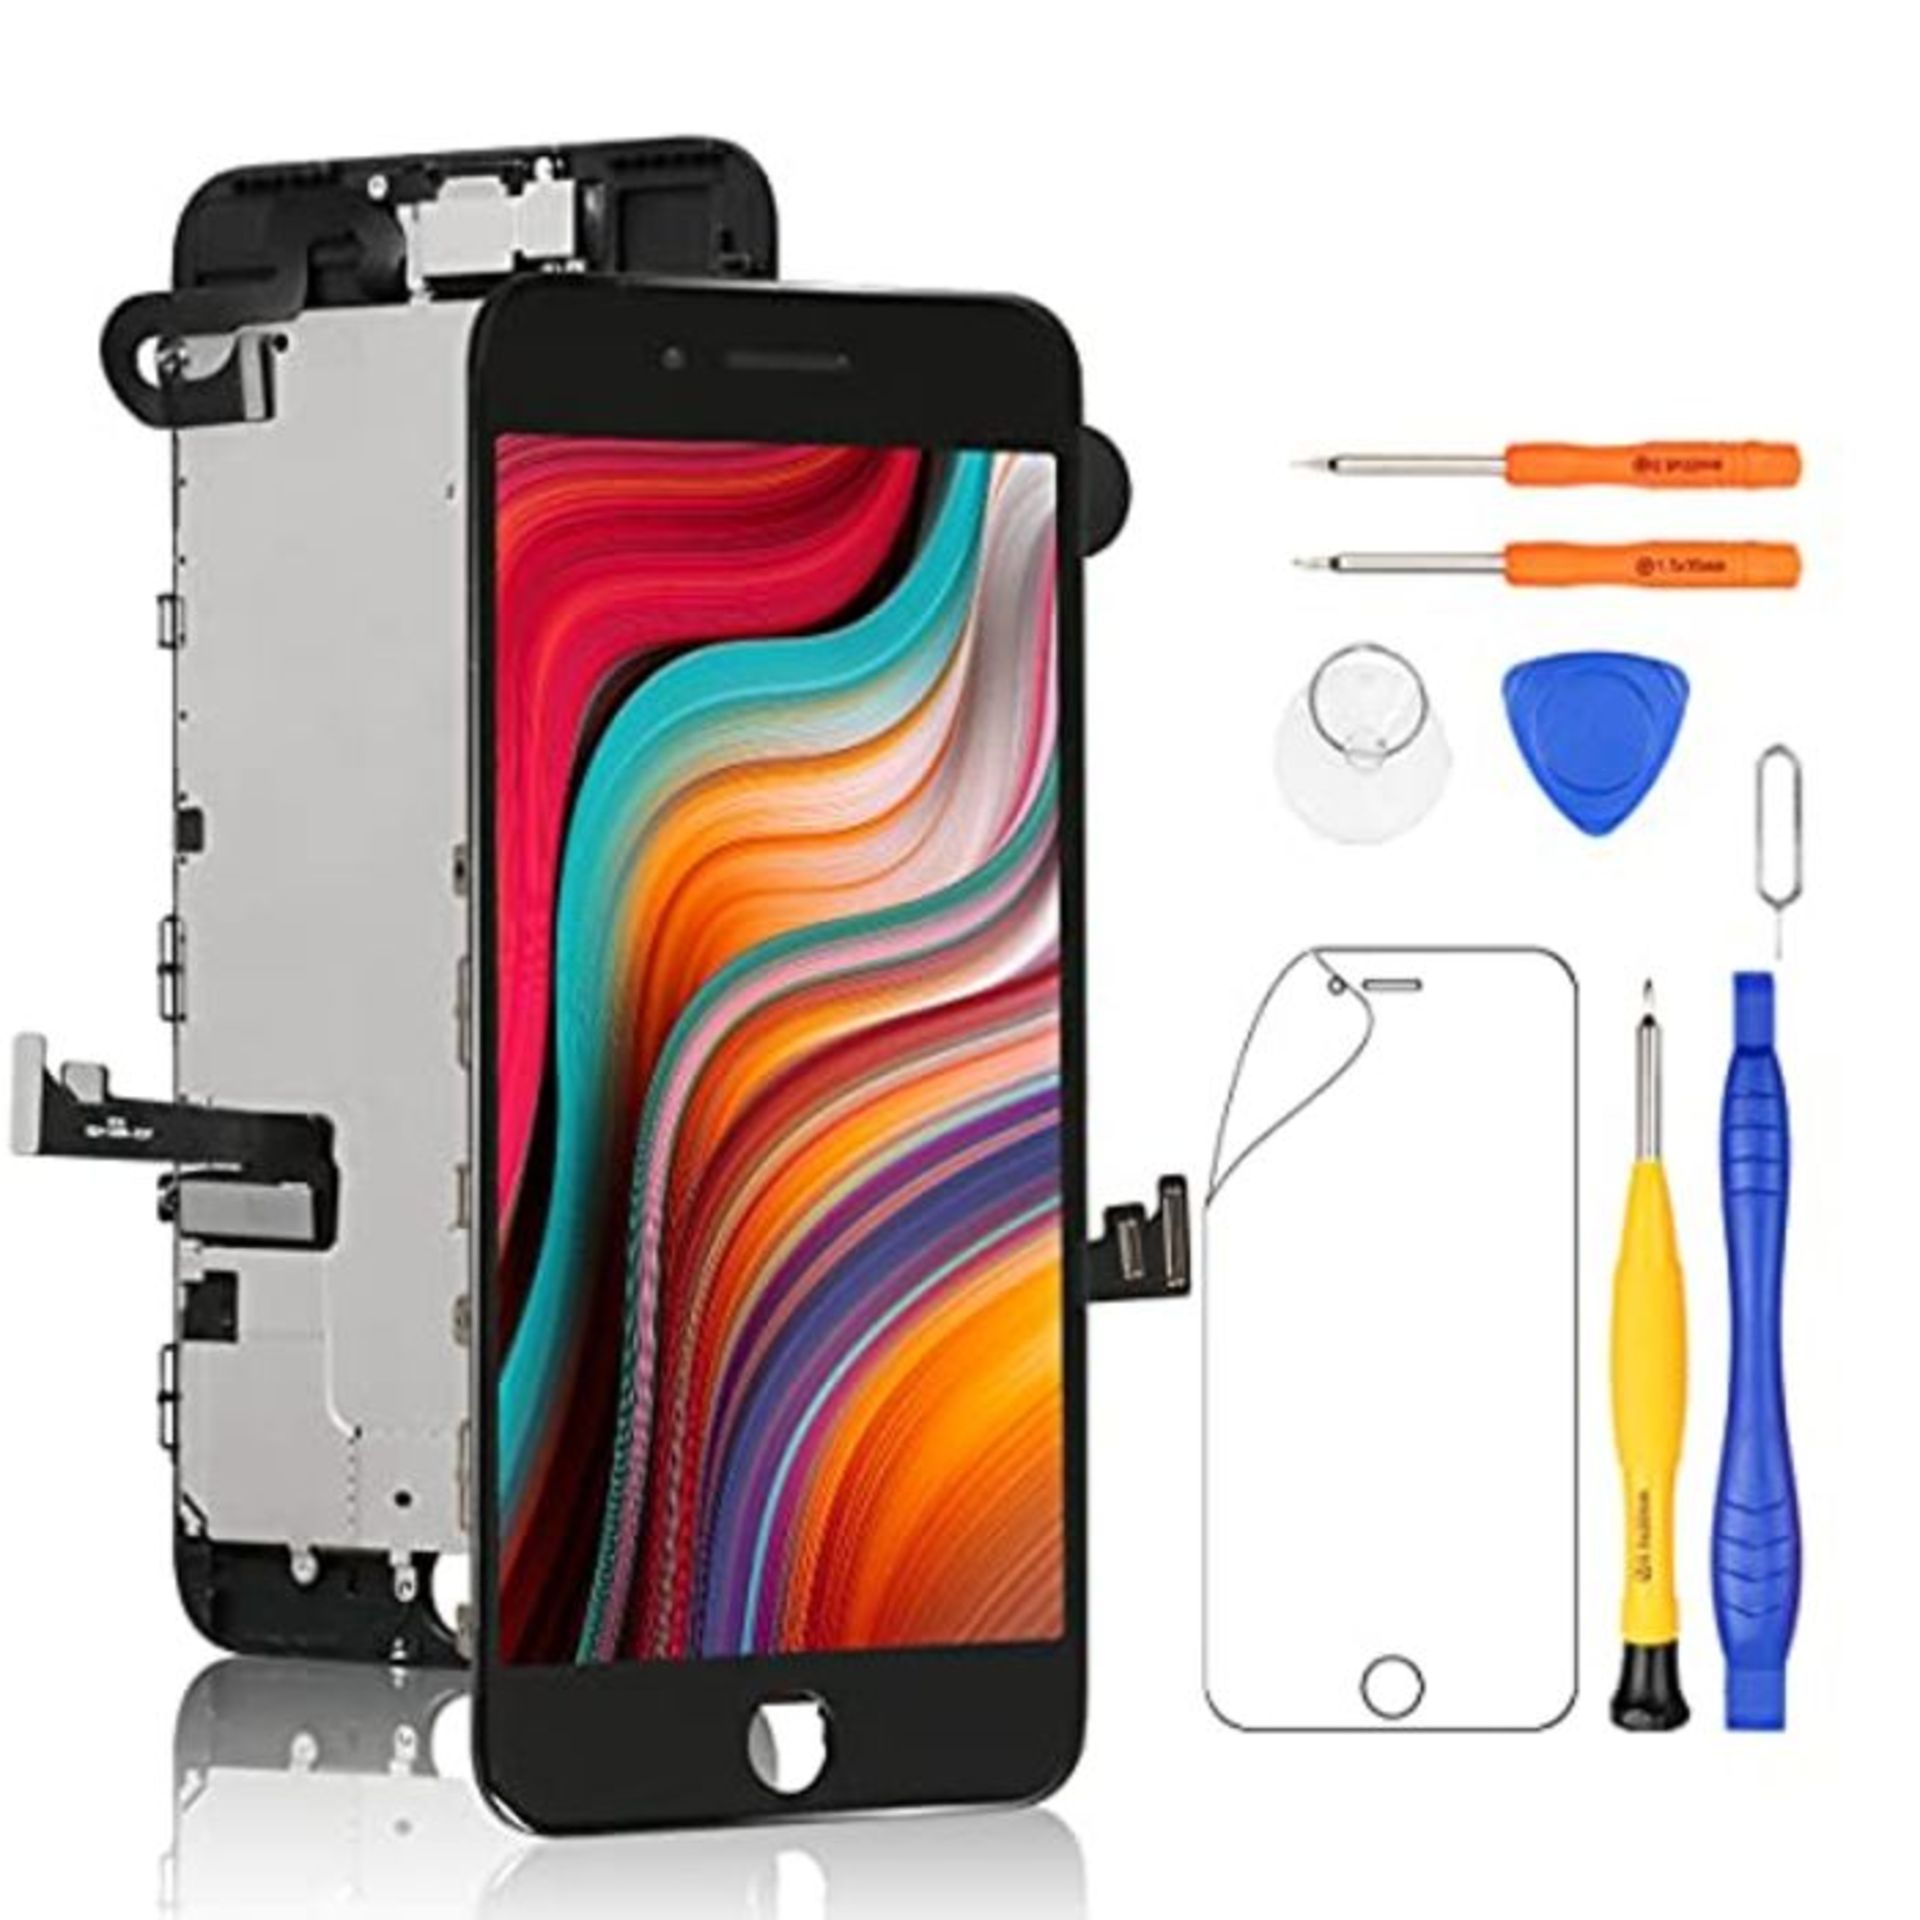 Yodoit for iPhone 7 Plus Screen Replacement Black With Front Camera, Earpiece Speaker,